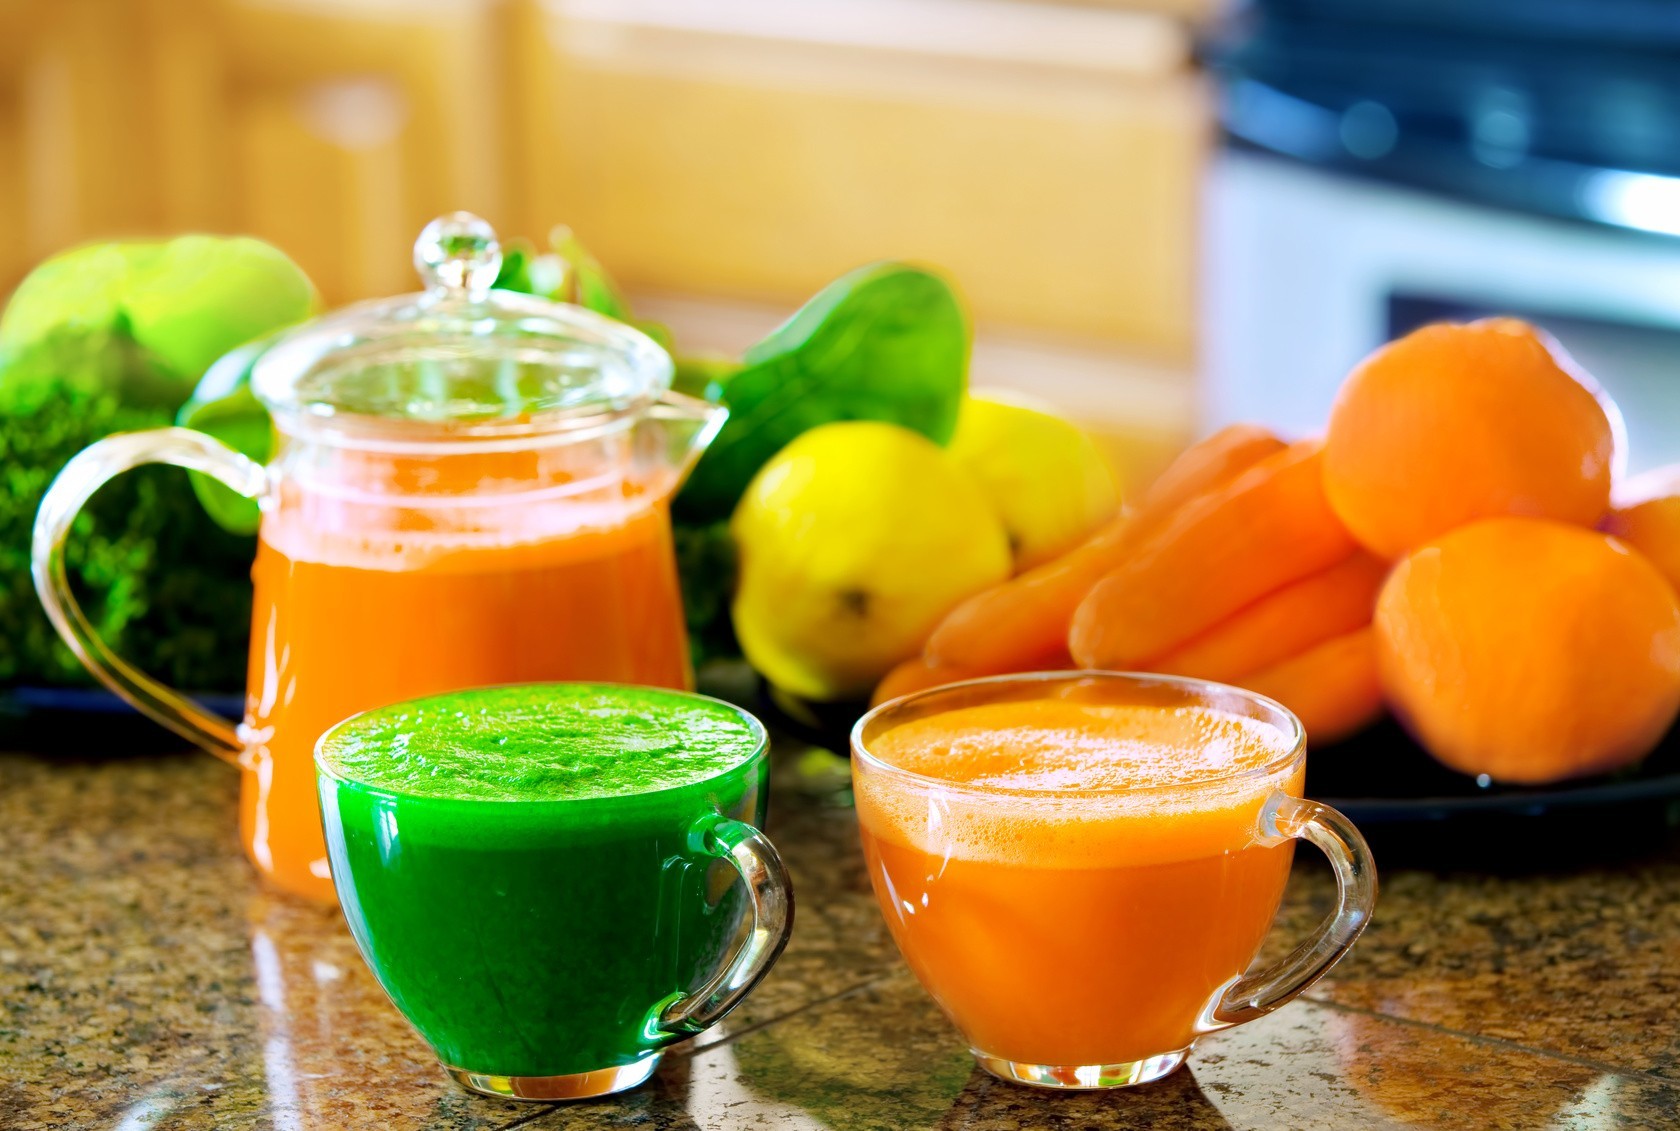 Two cups of fresh vegetable juice on kitchen counter with vegetables in background